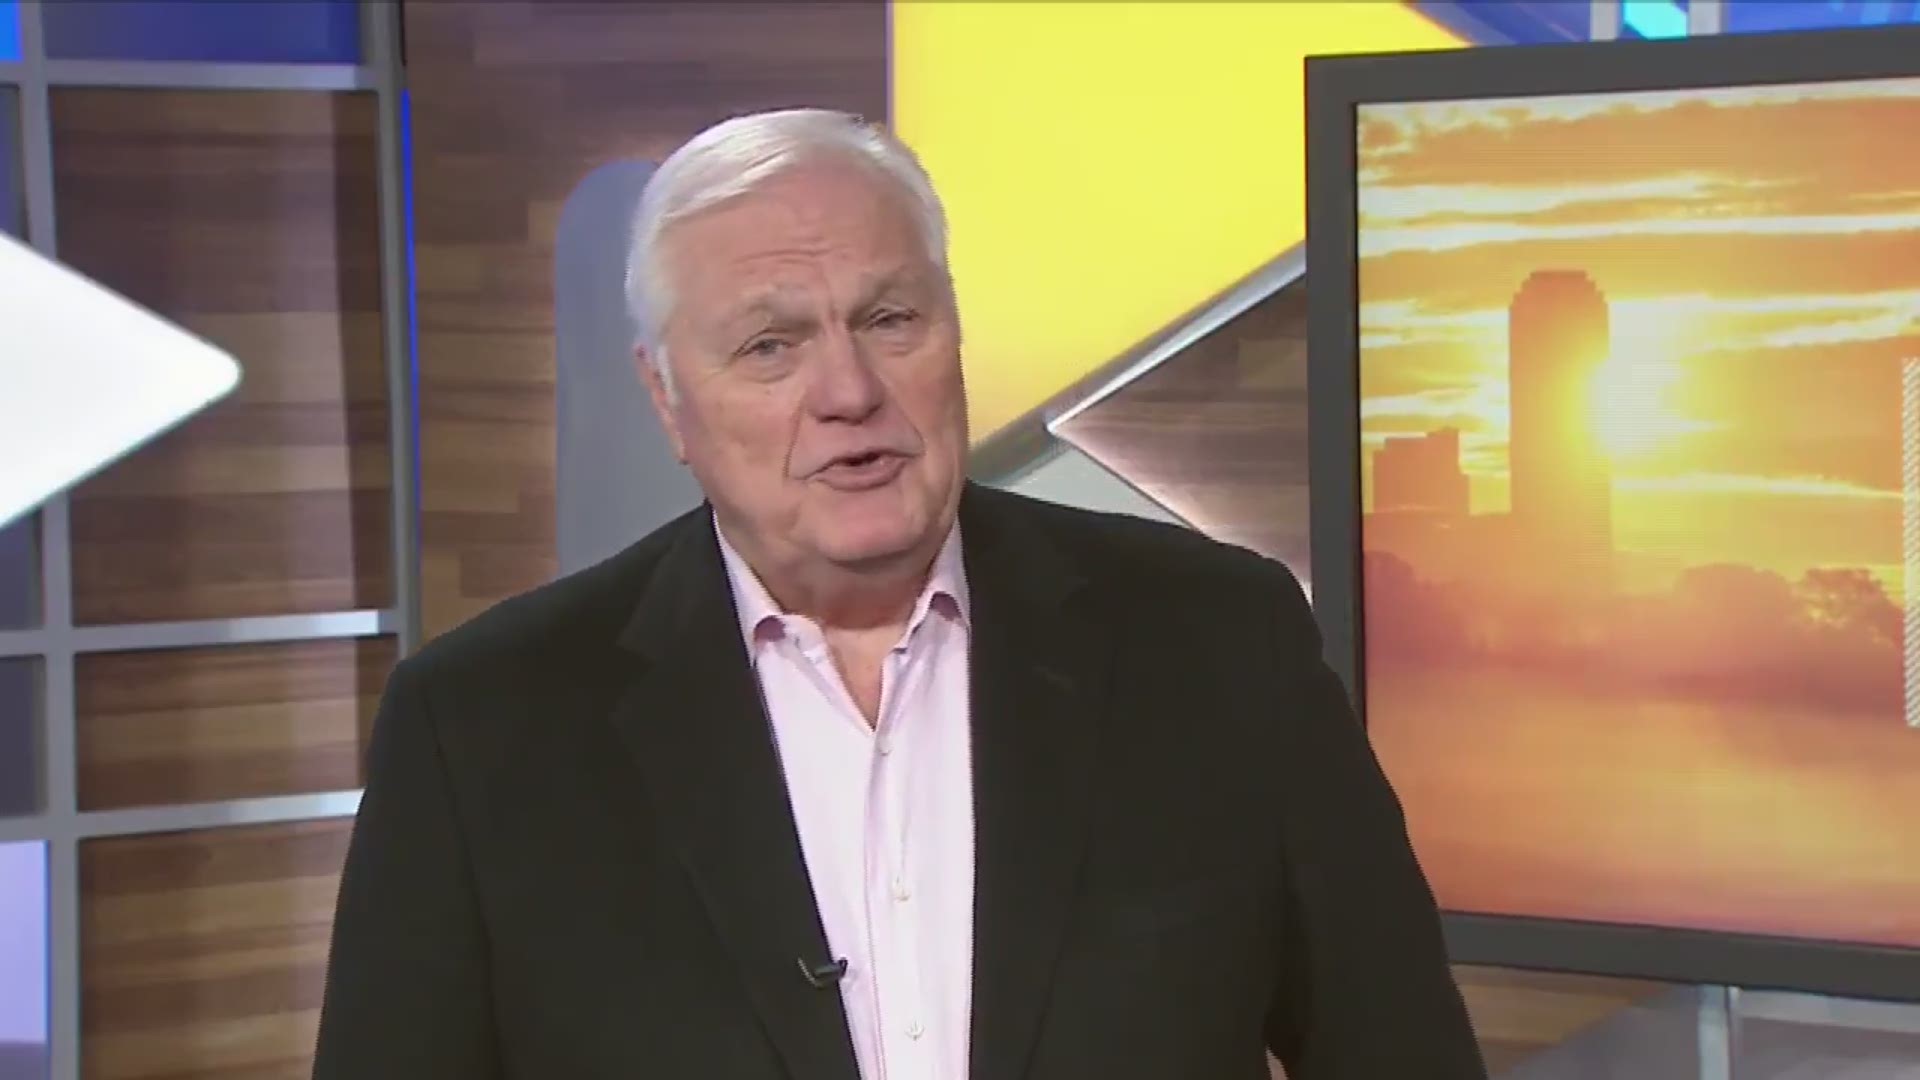 Dale Hansen weighs in on three decades of Jerry Jones' ownership of the Cowboys.